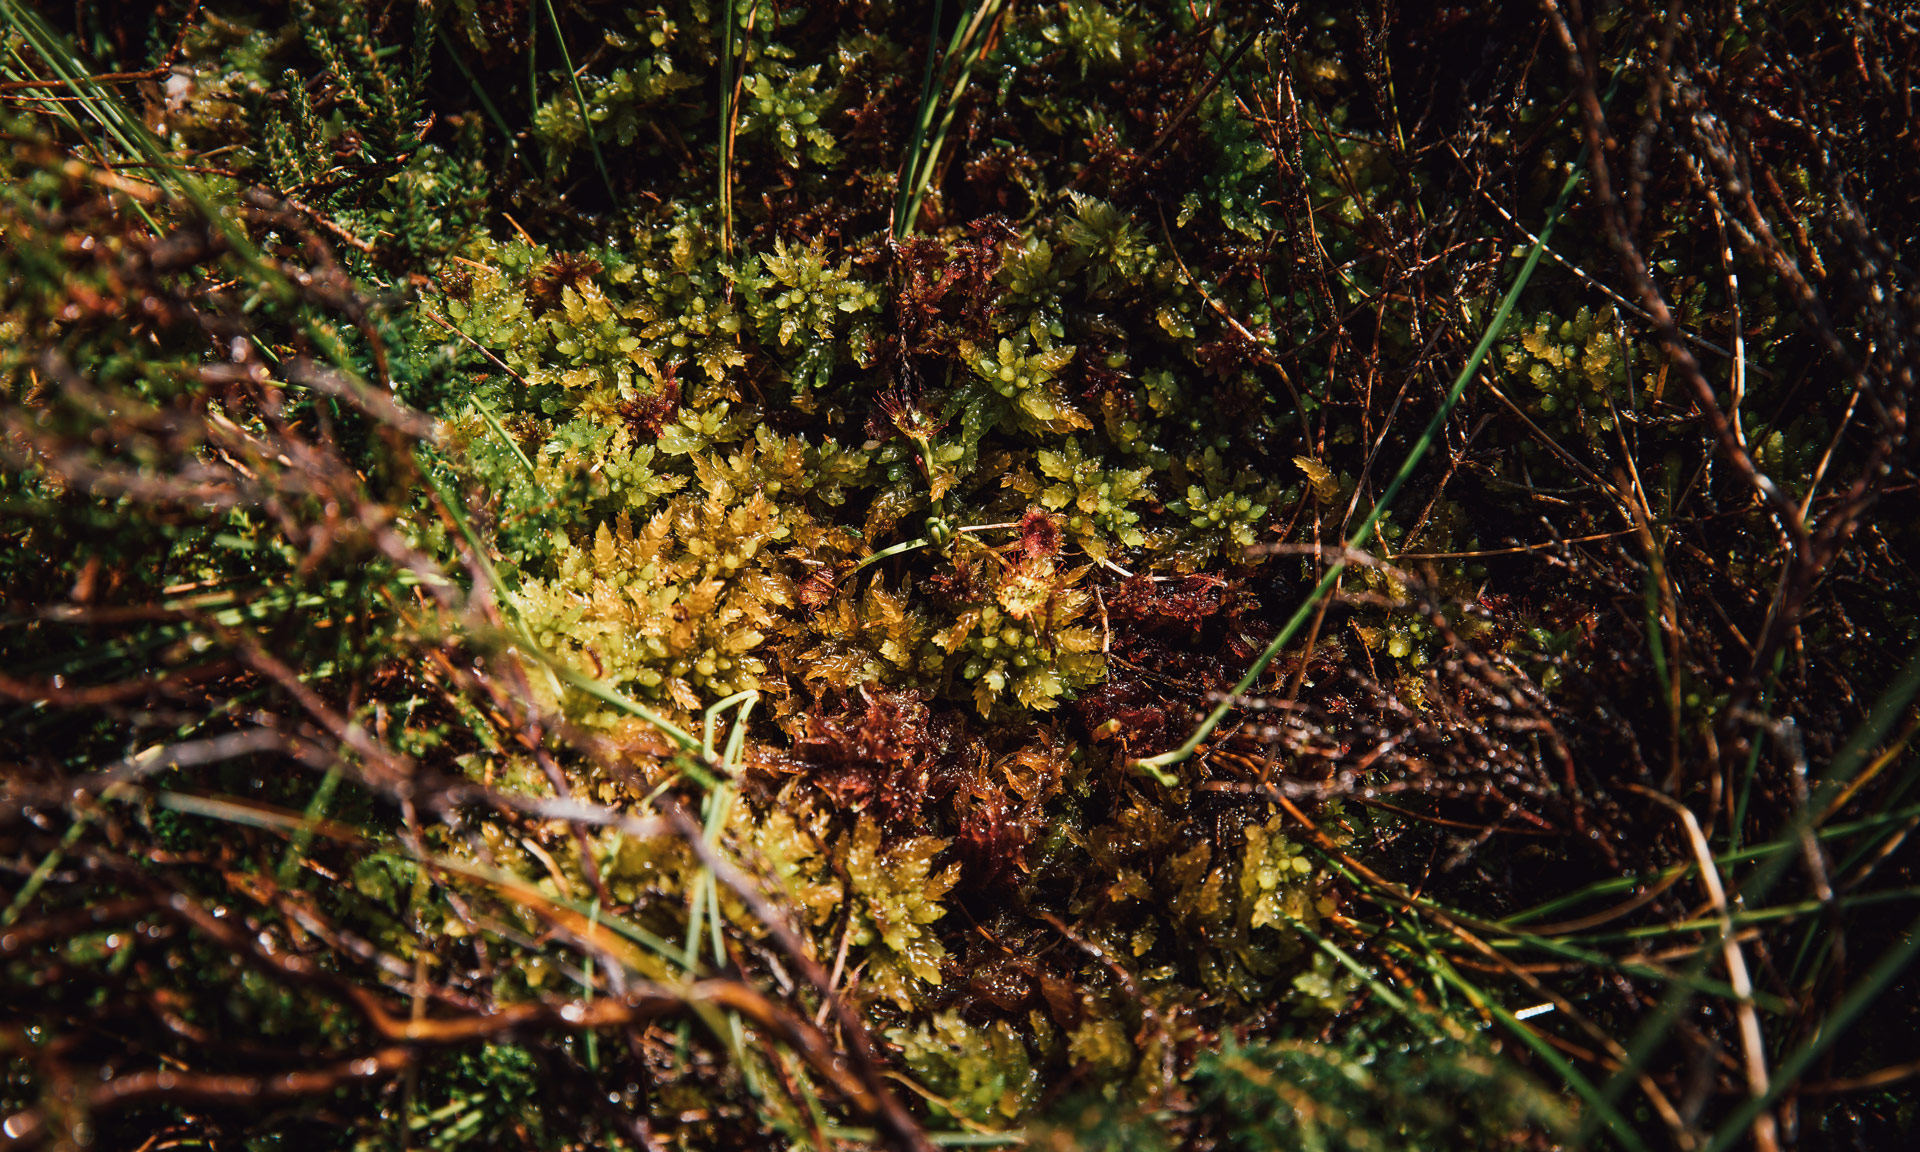 A close-up of mosses and fauna from a peatland.